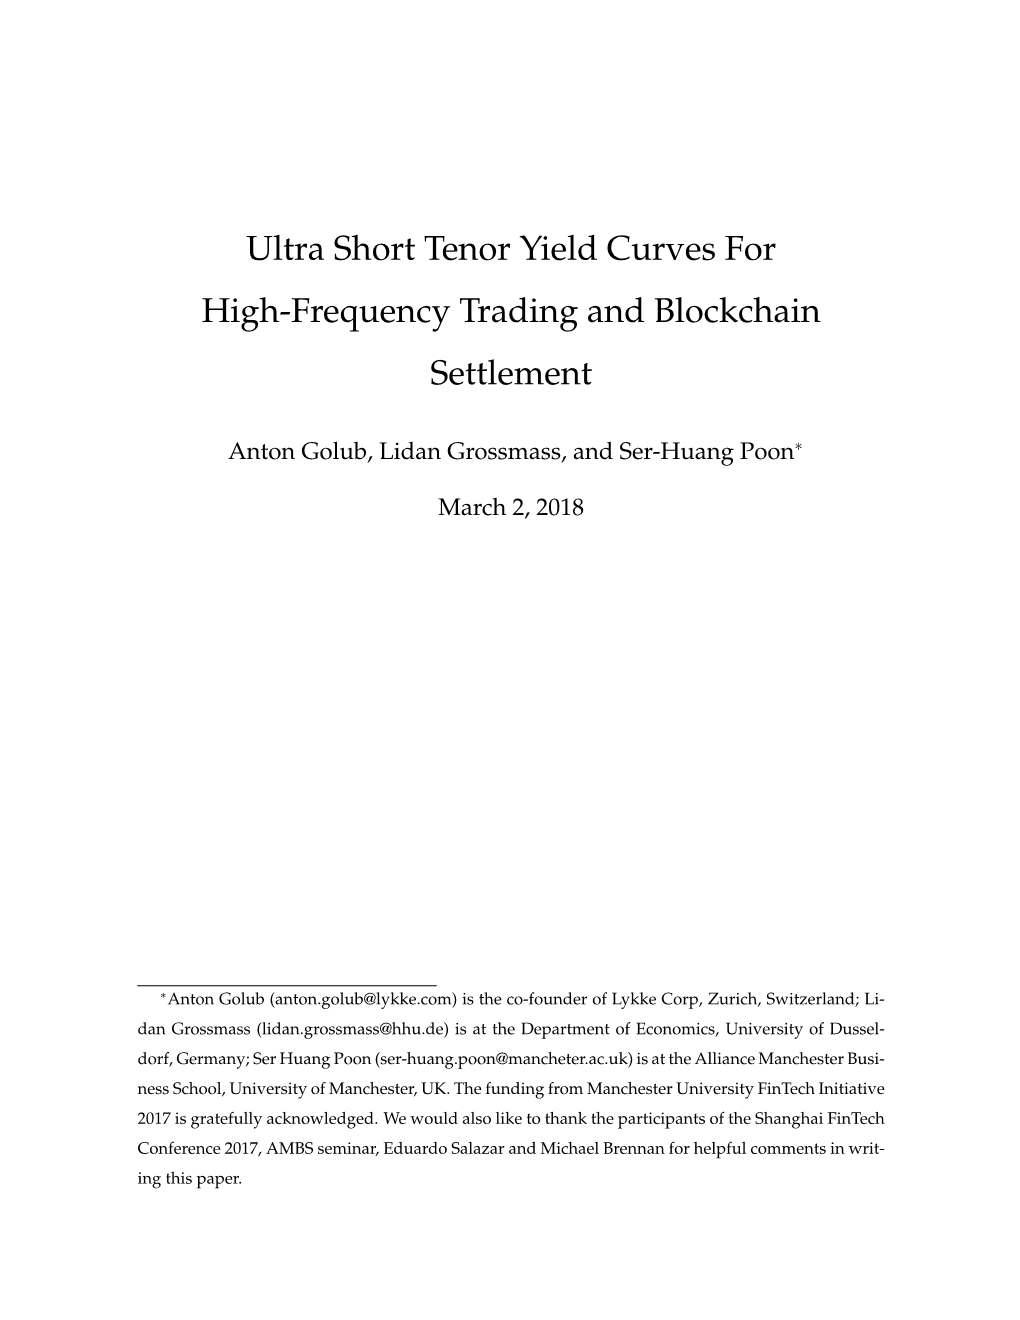 Ultra Short Tenor Yield Curves for High-Frequency Trading and Blockchain Settlement